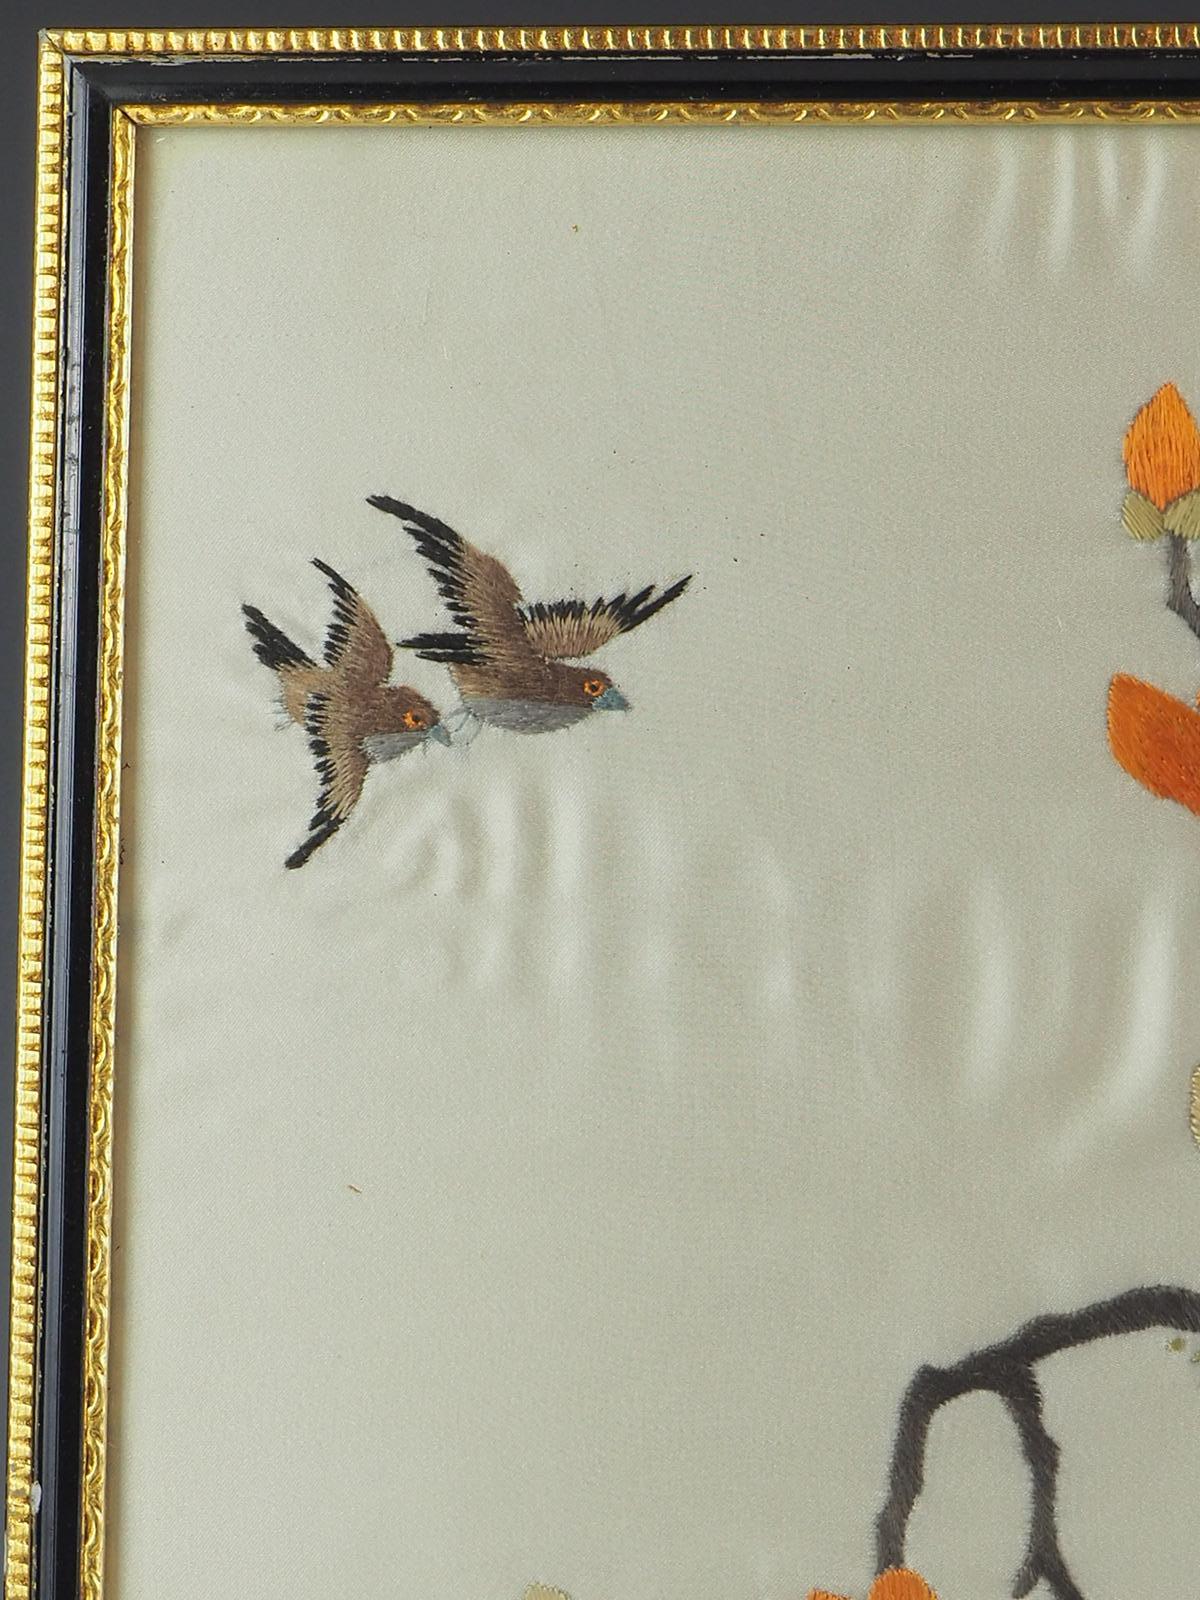 Framed 20th Century Chinese Silk Love Birds Embroidery 4